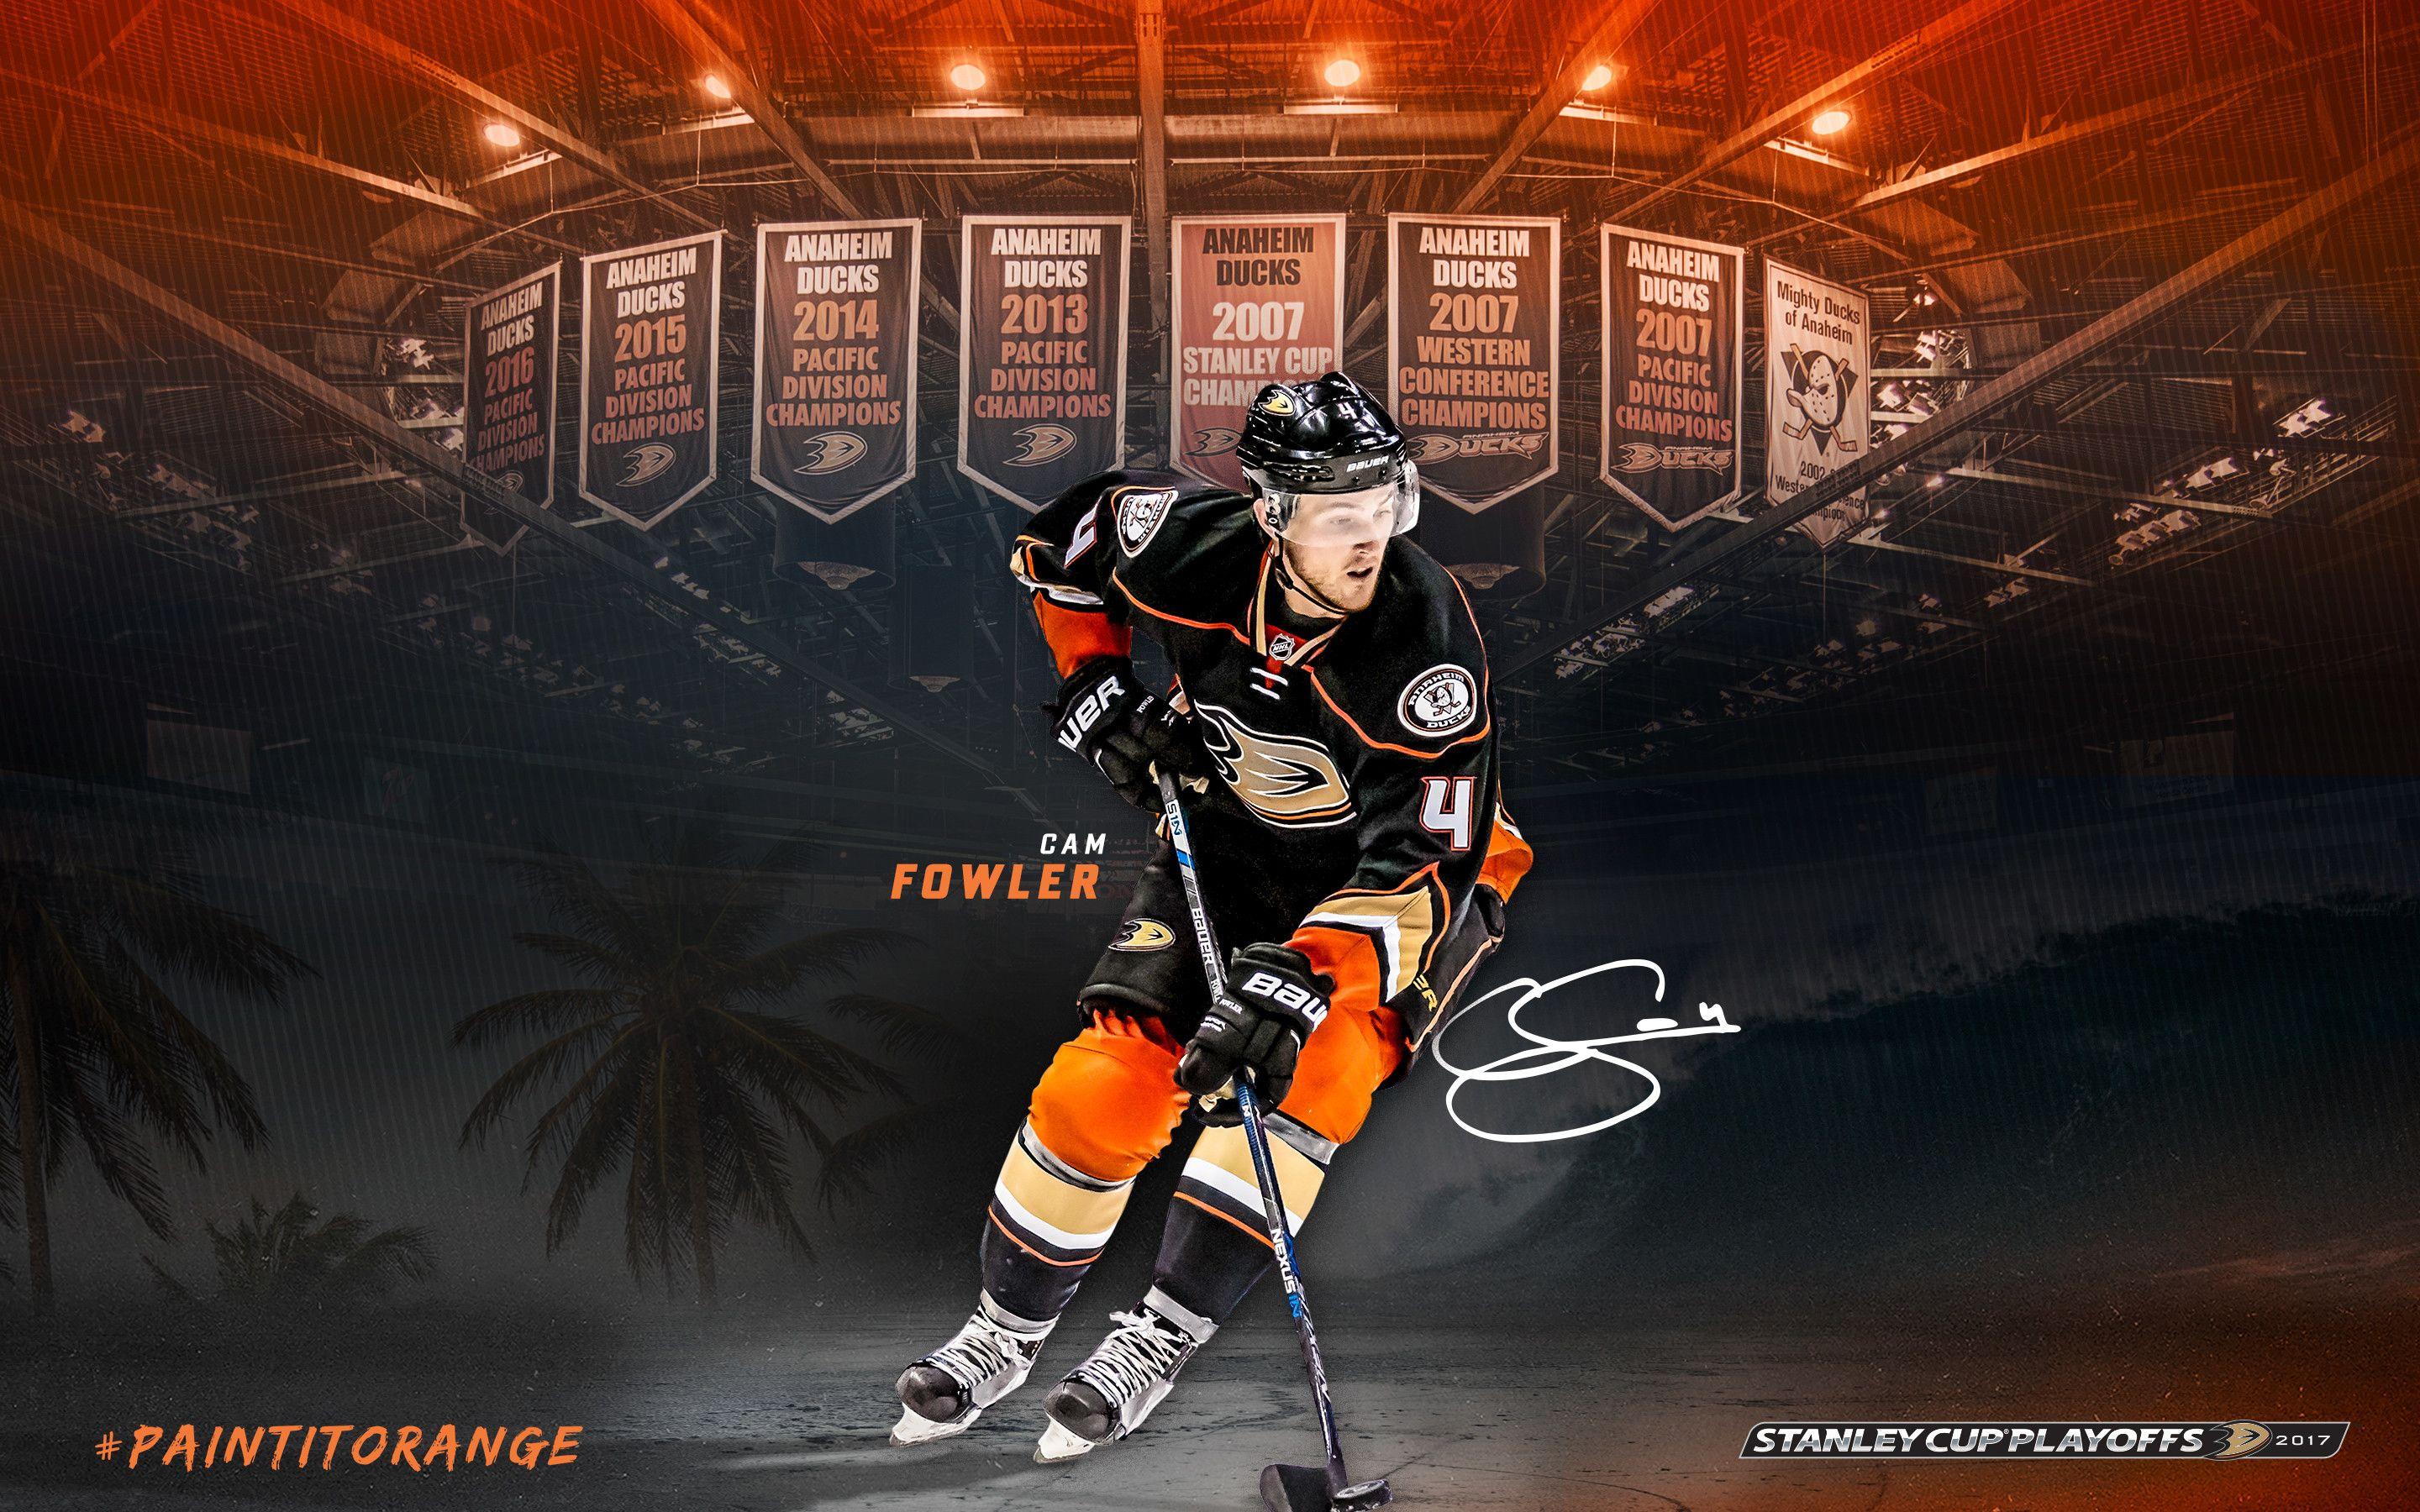 Download wallpapers Anaheim Ducks 4k logo NHL hockey Western  Conference USA grunge metal texture Pacific Division for desktop free  Pictures for deskto  Anaheim ducks Anaheim ducks hockey Nhl